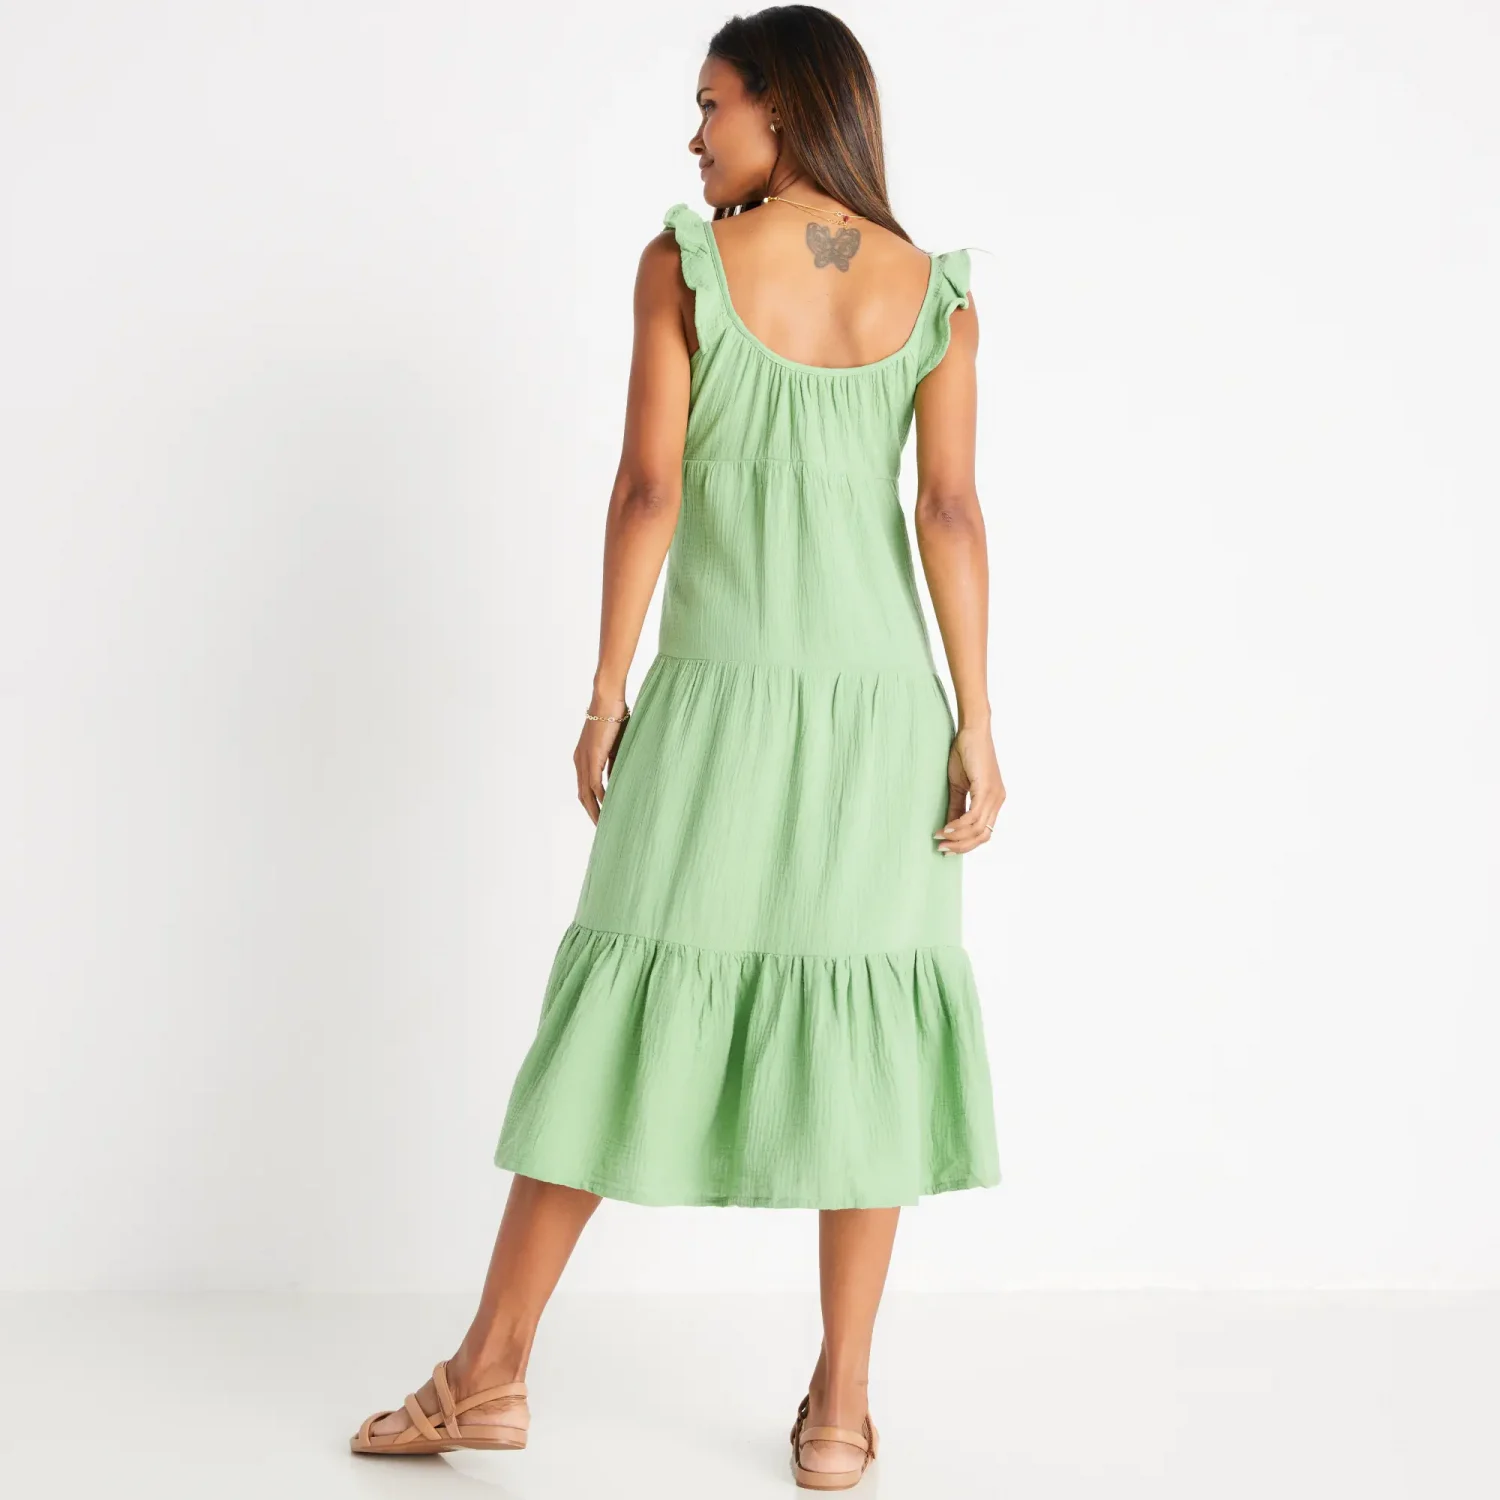 Marine Layer brand contemporary and stylish maternity friendly solid maxi dresses